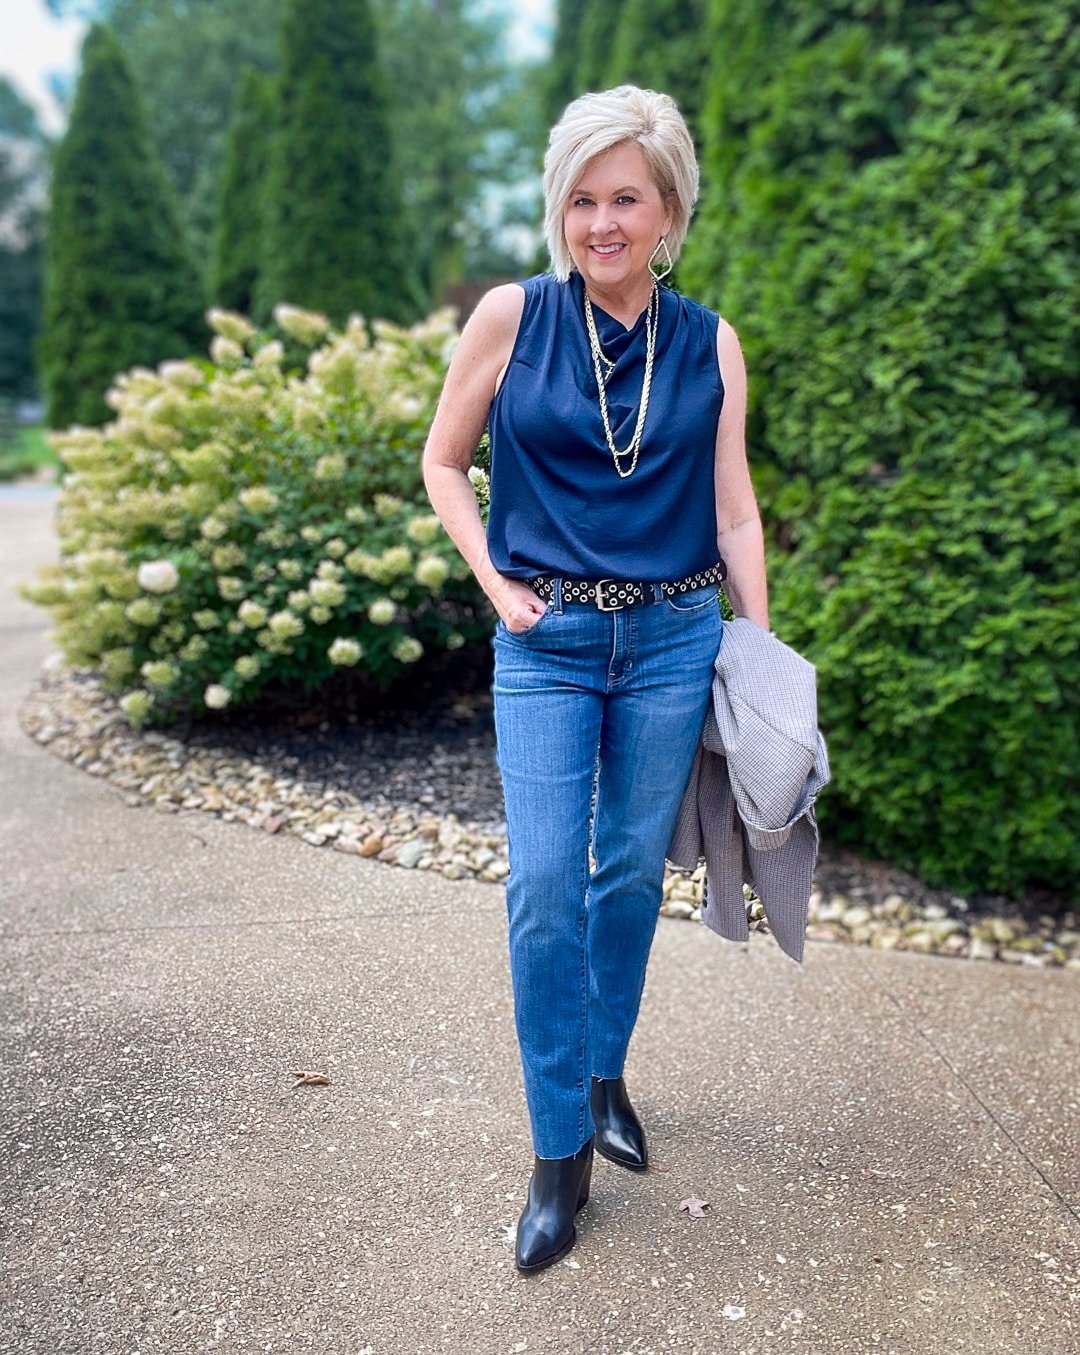 Over 40 Fashion Blogger, Tania Stephens is styling jeans for a western style1-4